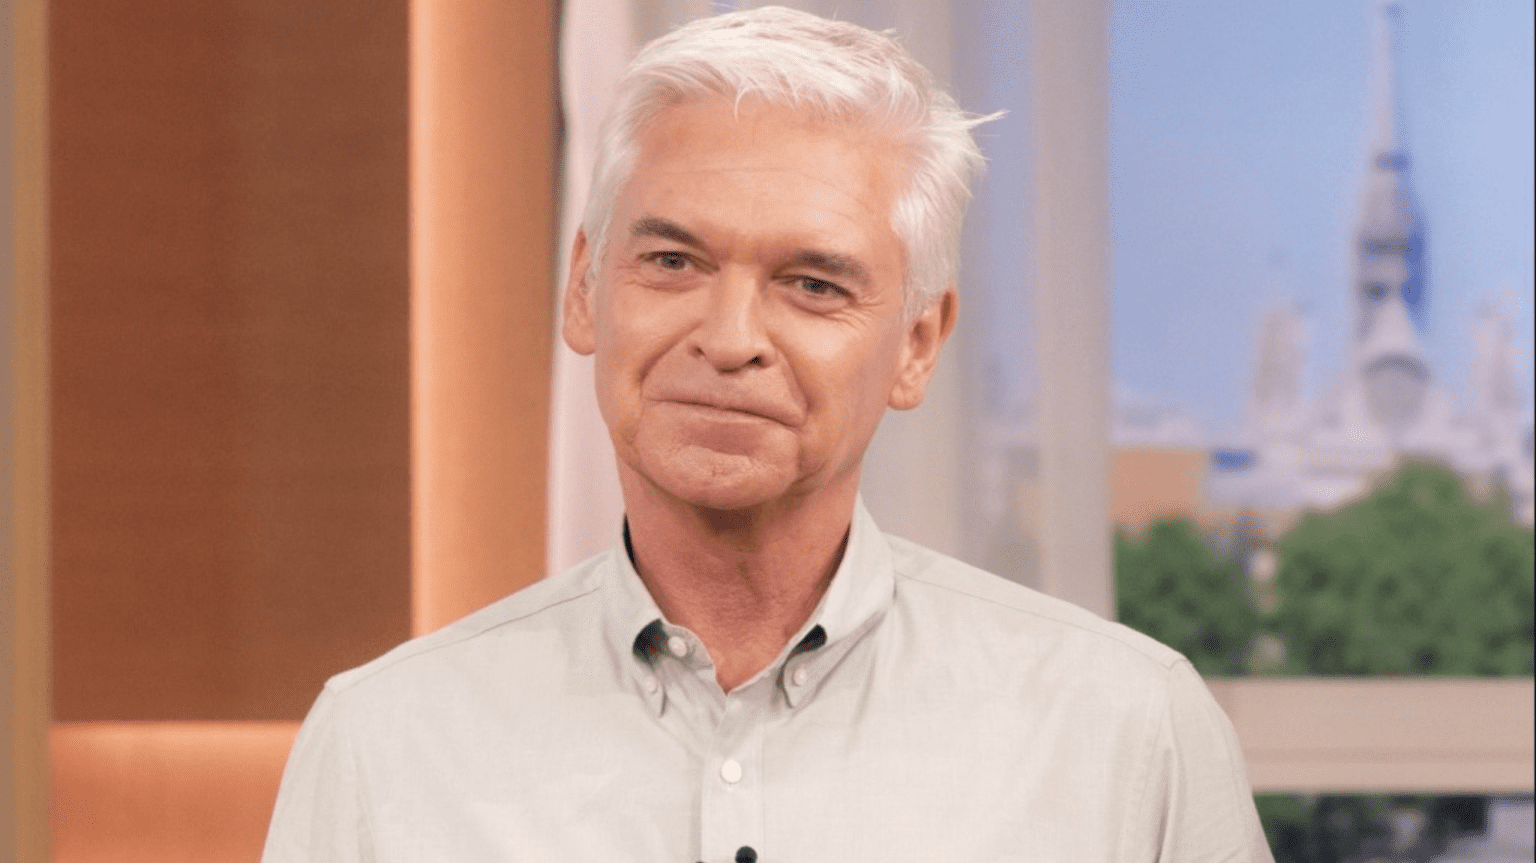 Phillip Schofield says affair with young runner began after ‘consensual moment’ in his dressing room in 2017